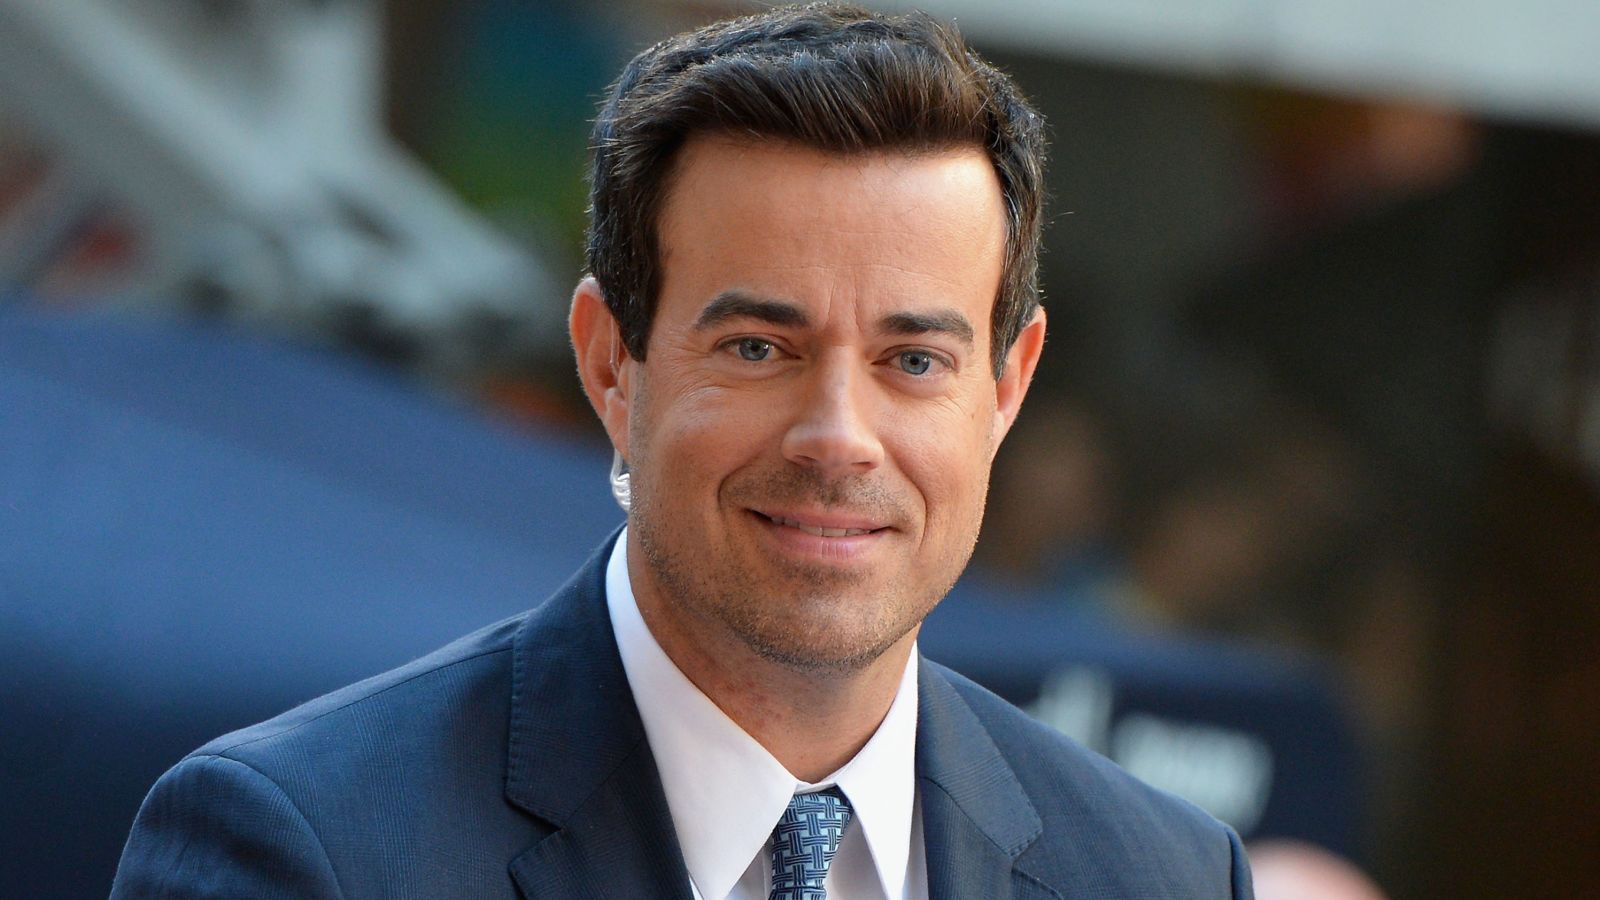 How Much Of Carson Daly's 40 Million Net Worth Came From MTV?